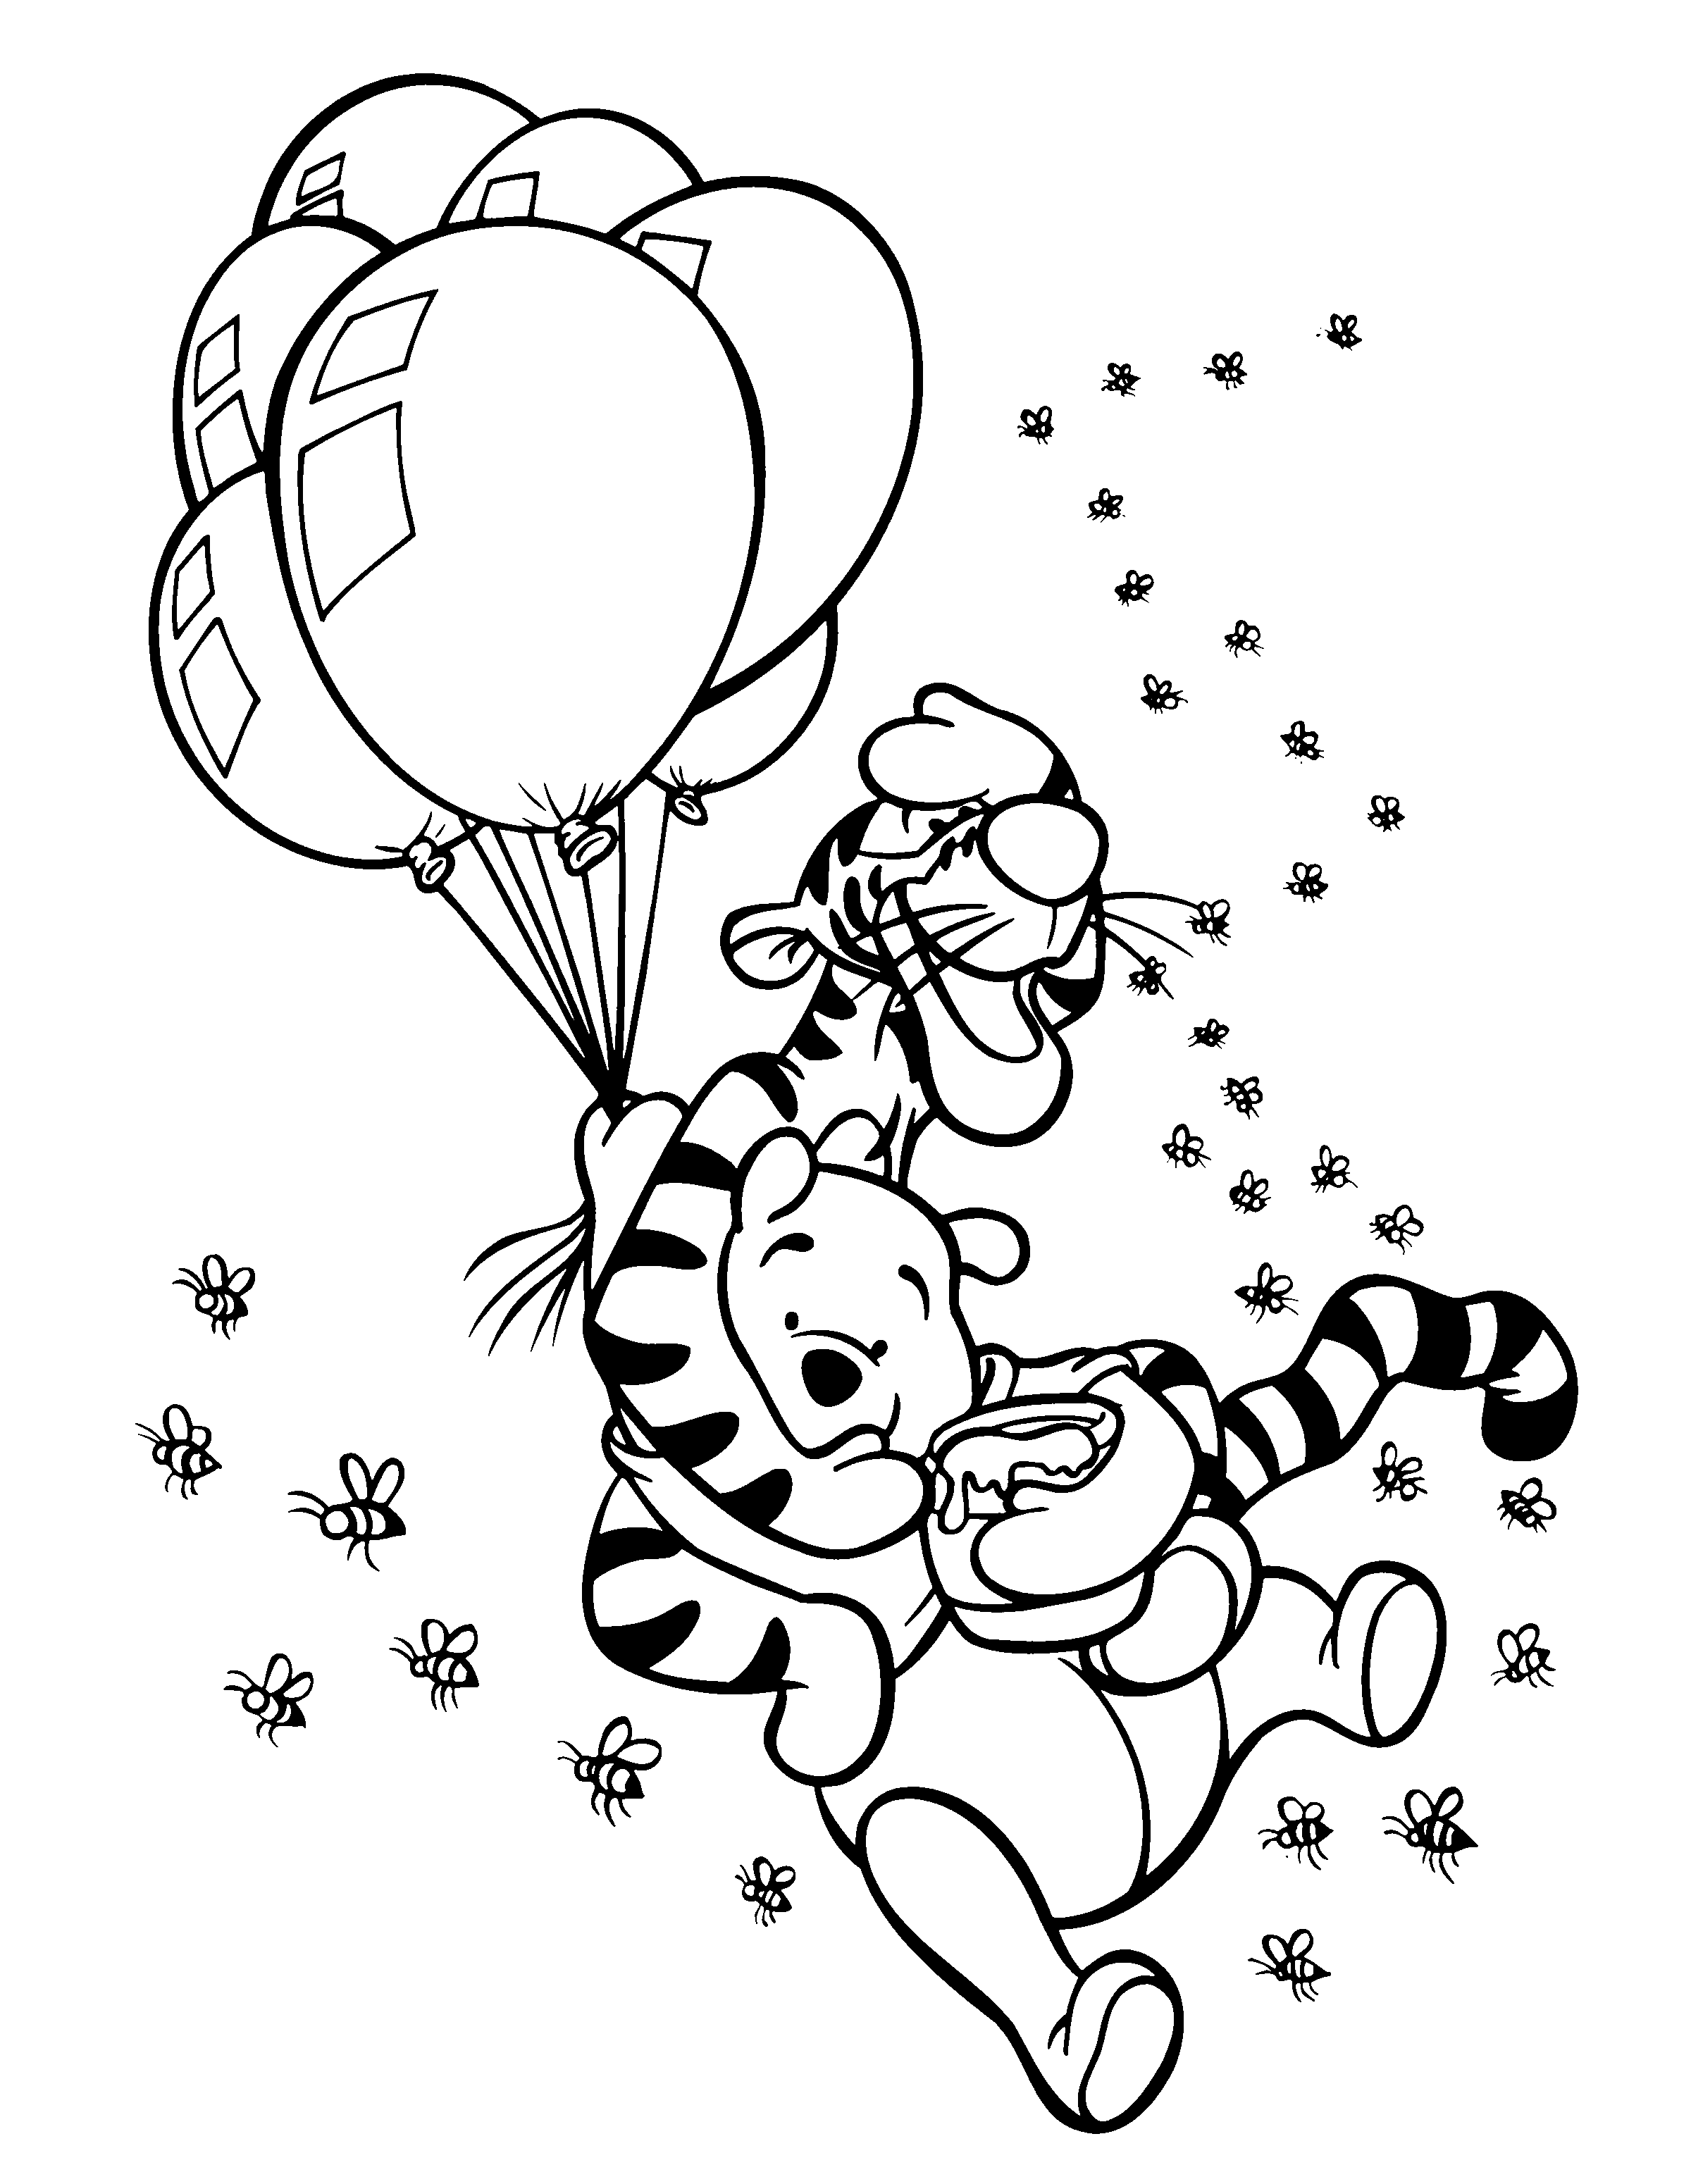 Floating Away On Balloons Winnie The Pooh Coloring Pages